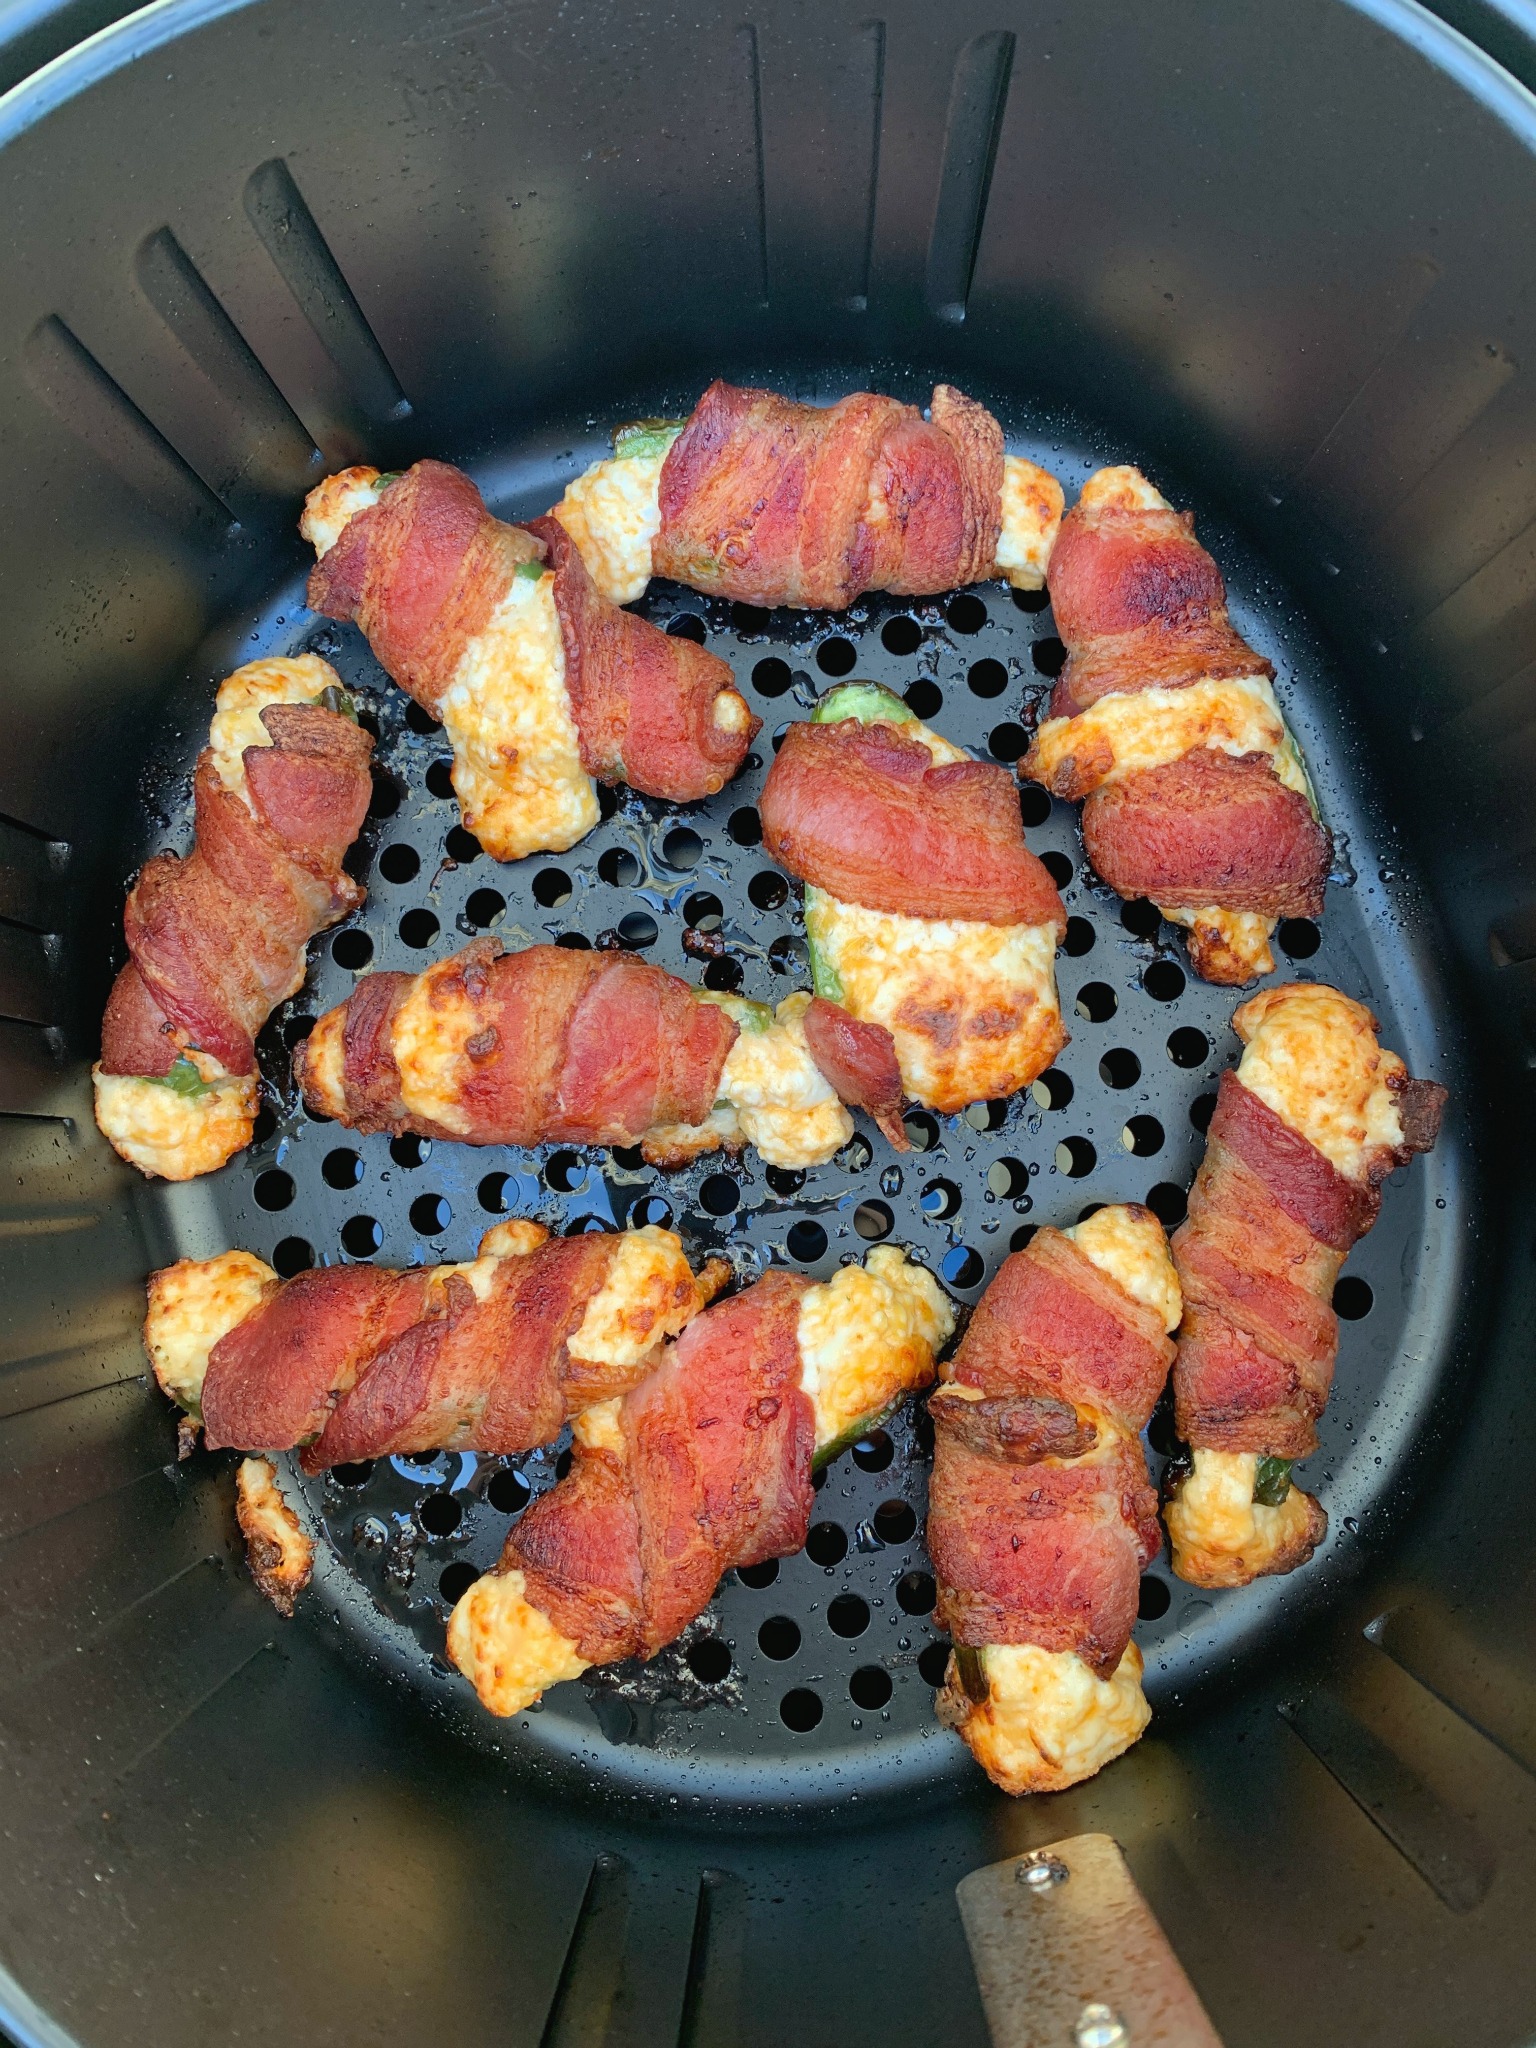 Jalapeno Poppers in the Air Fryer after cooking